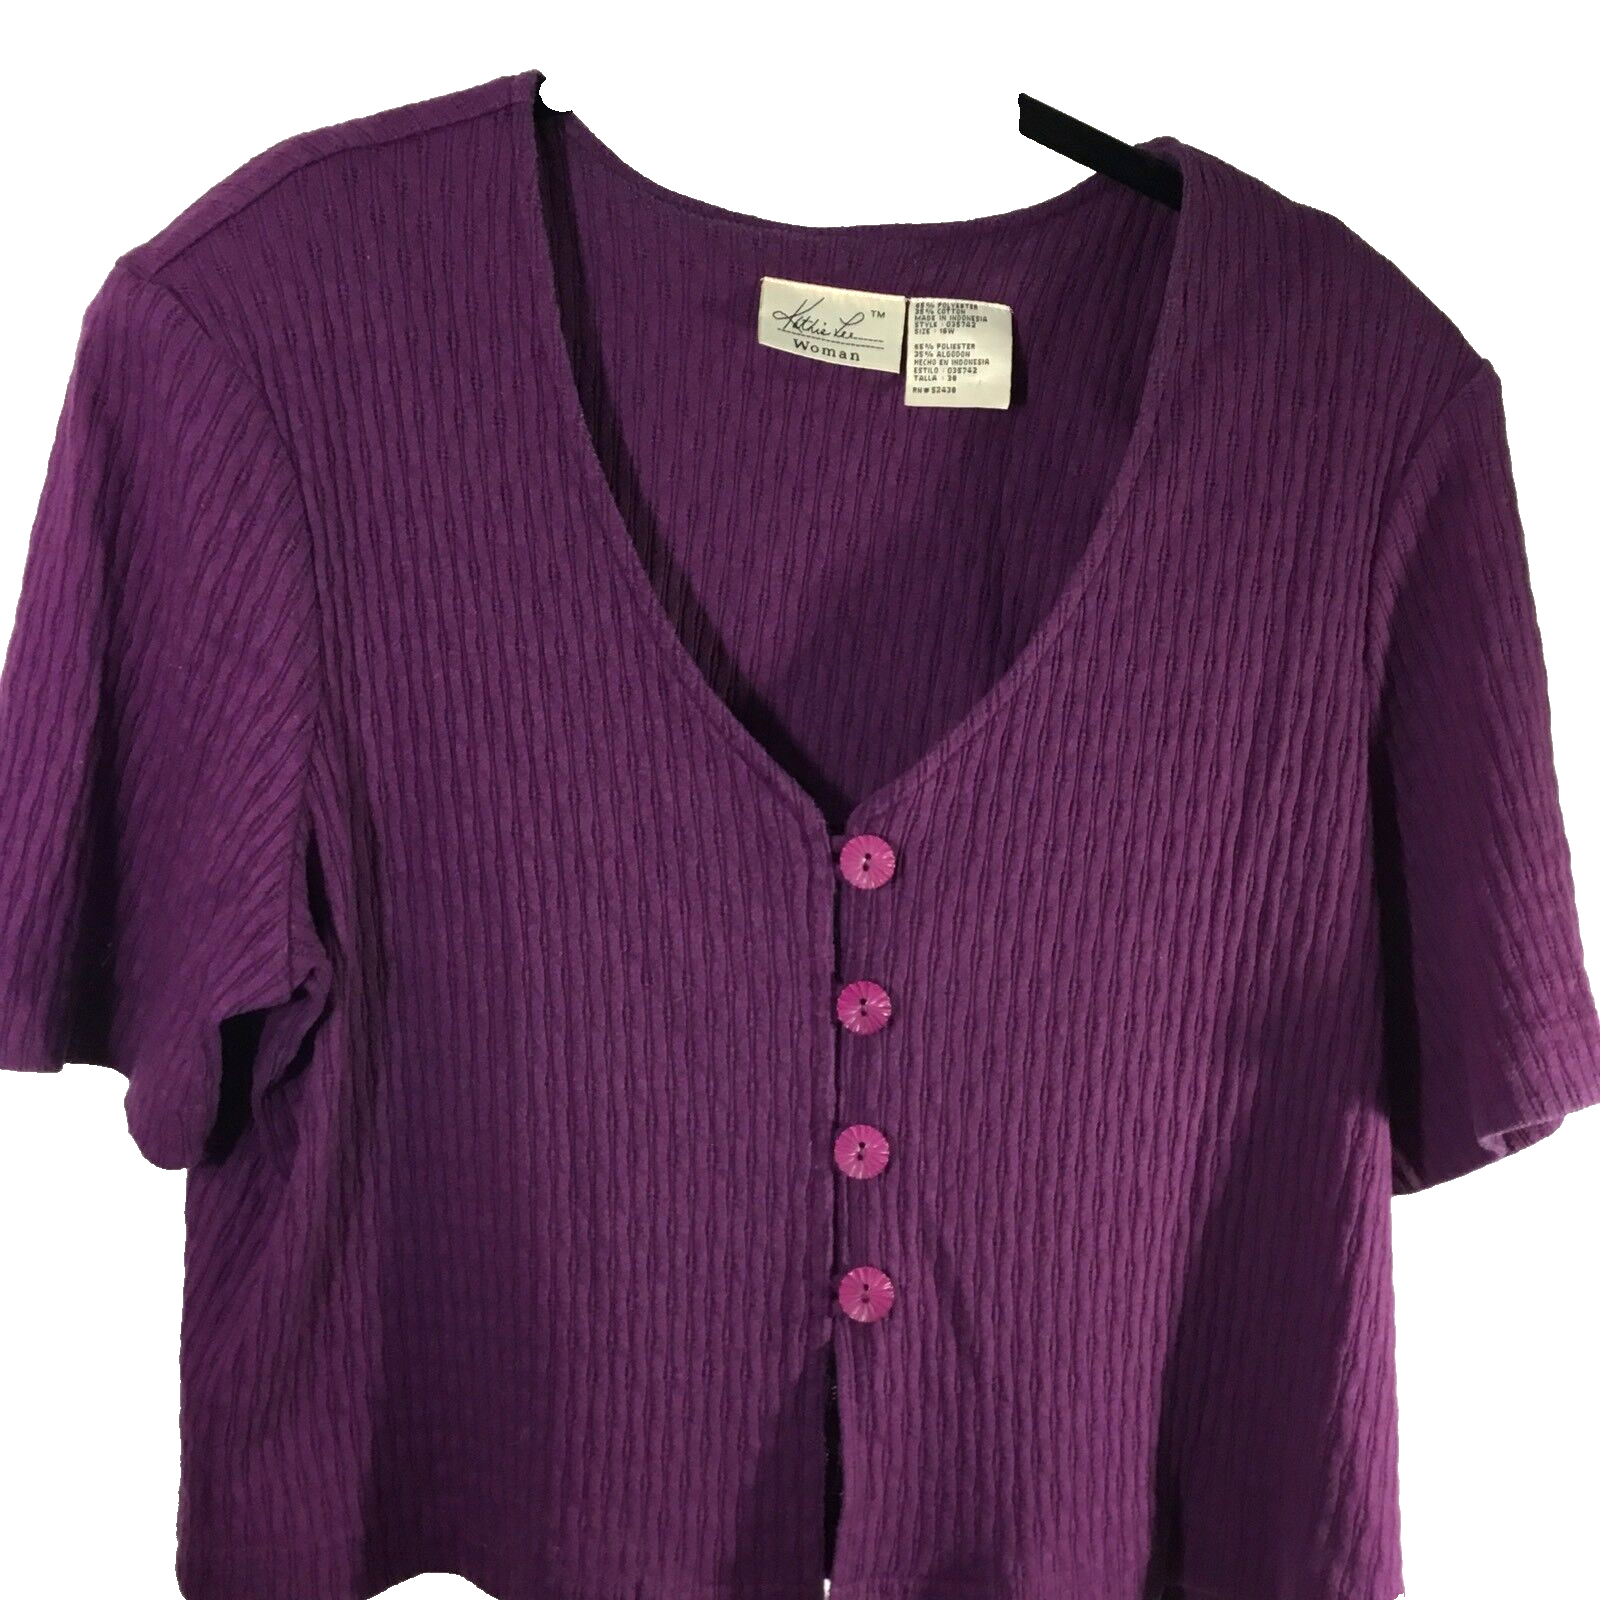 Primary image for Kathie Lee Short Sleeve Button Down Sweater Top Size 18 Purple Over Dress Jacket